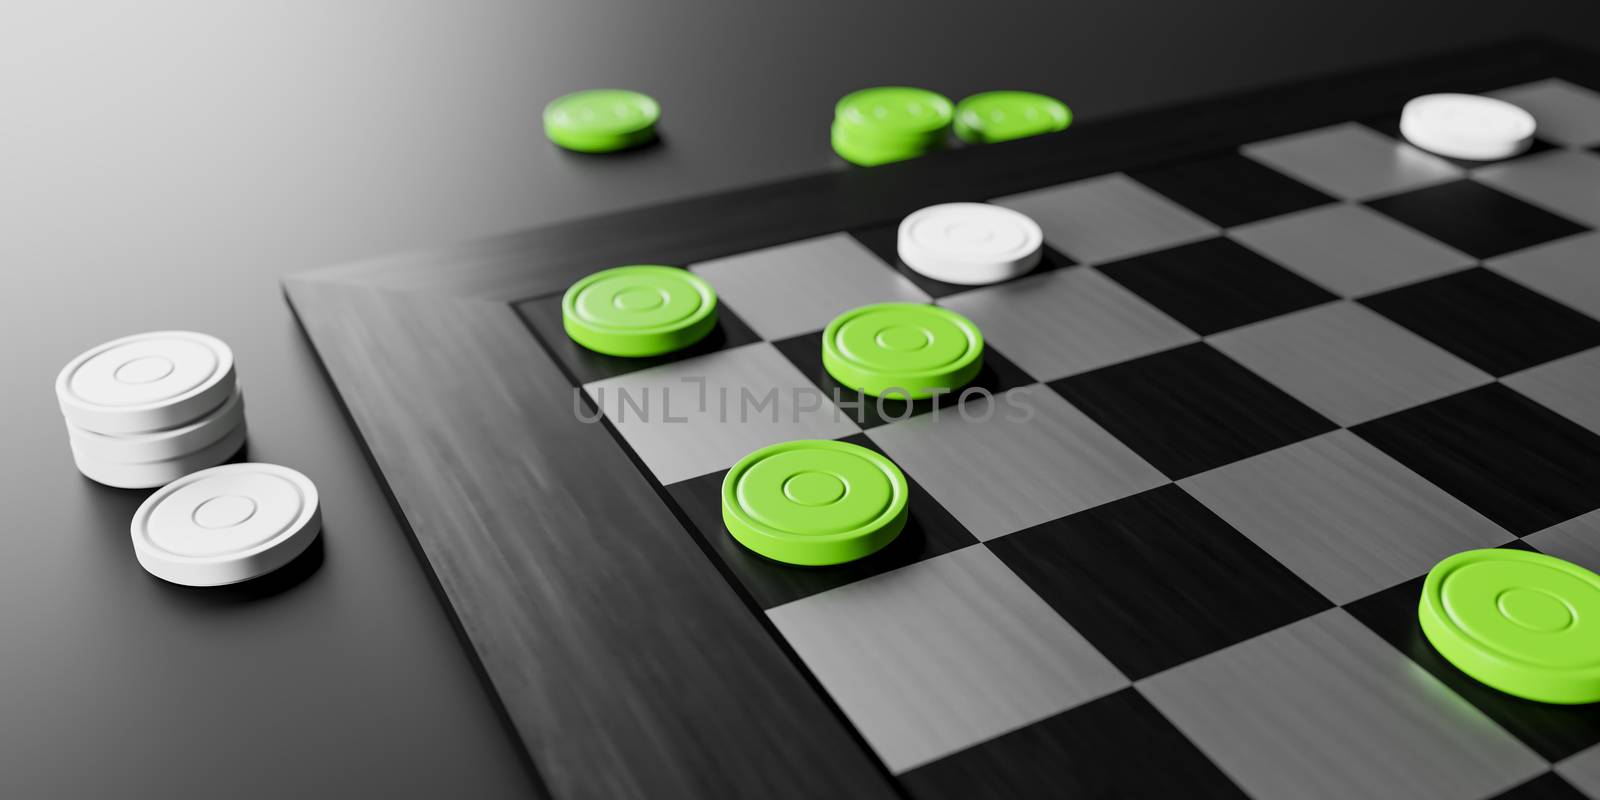 An image of a draughts game board